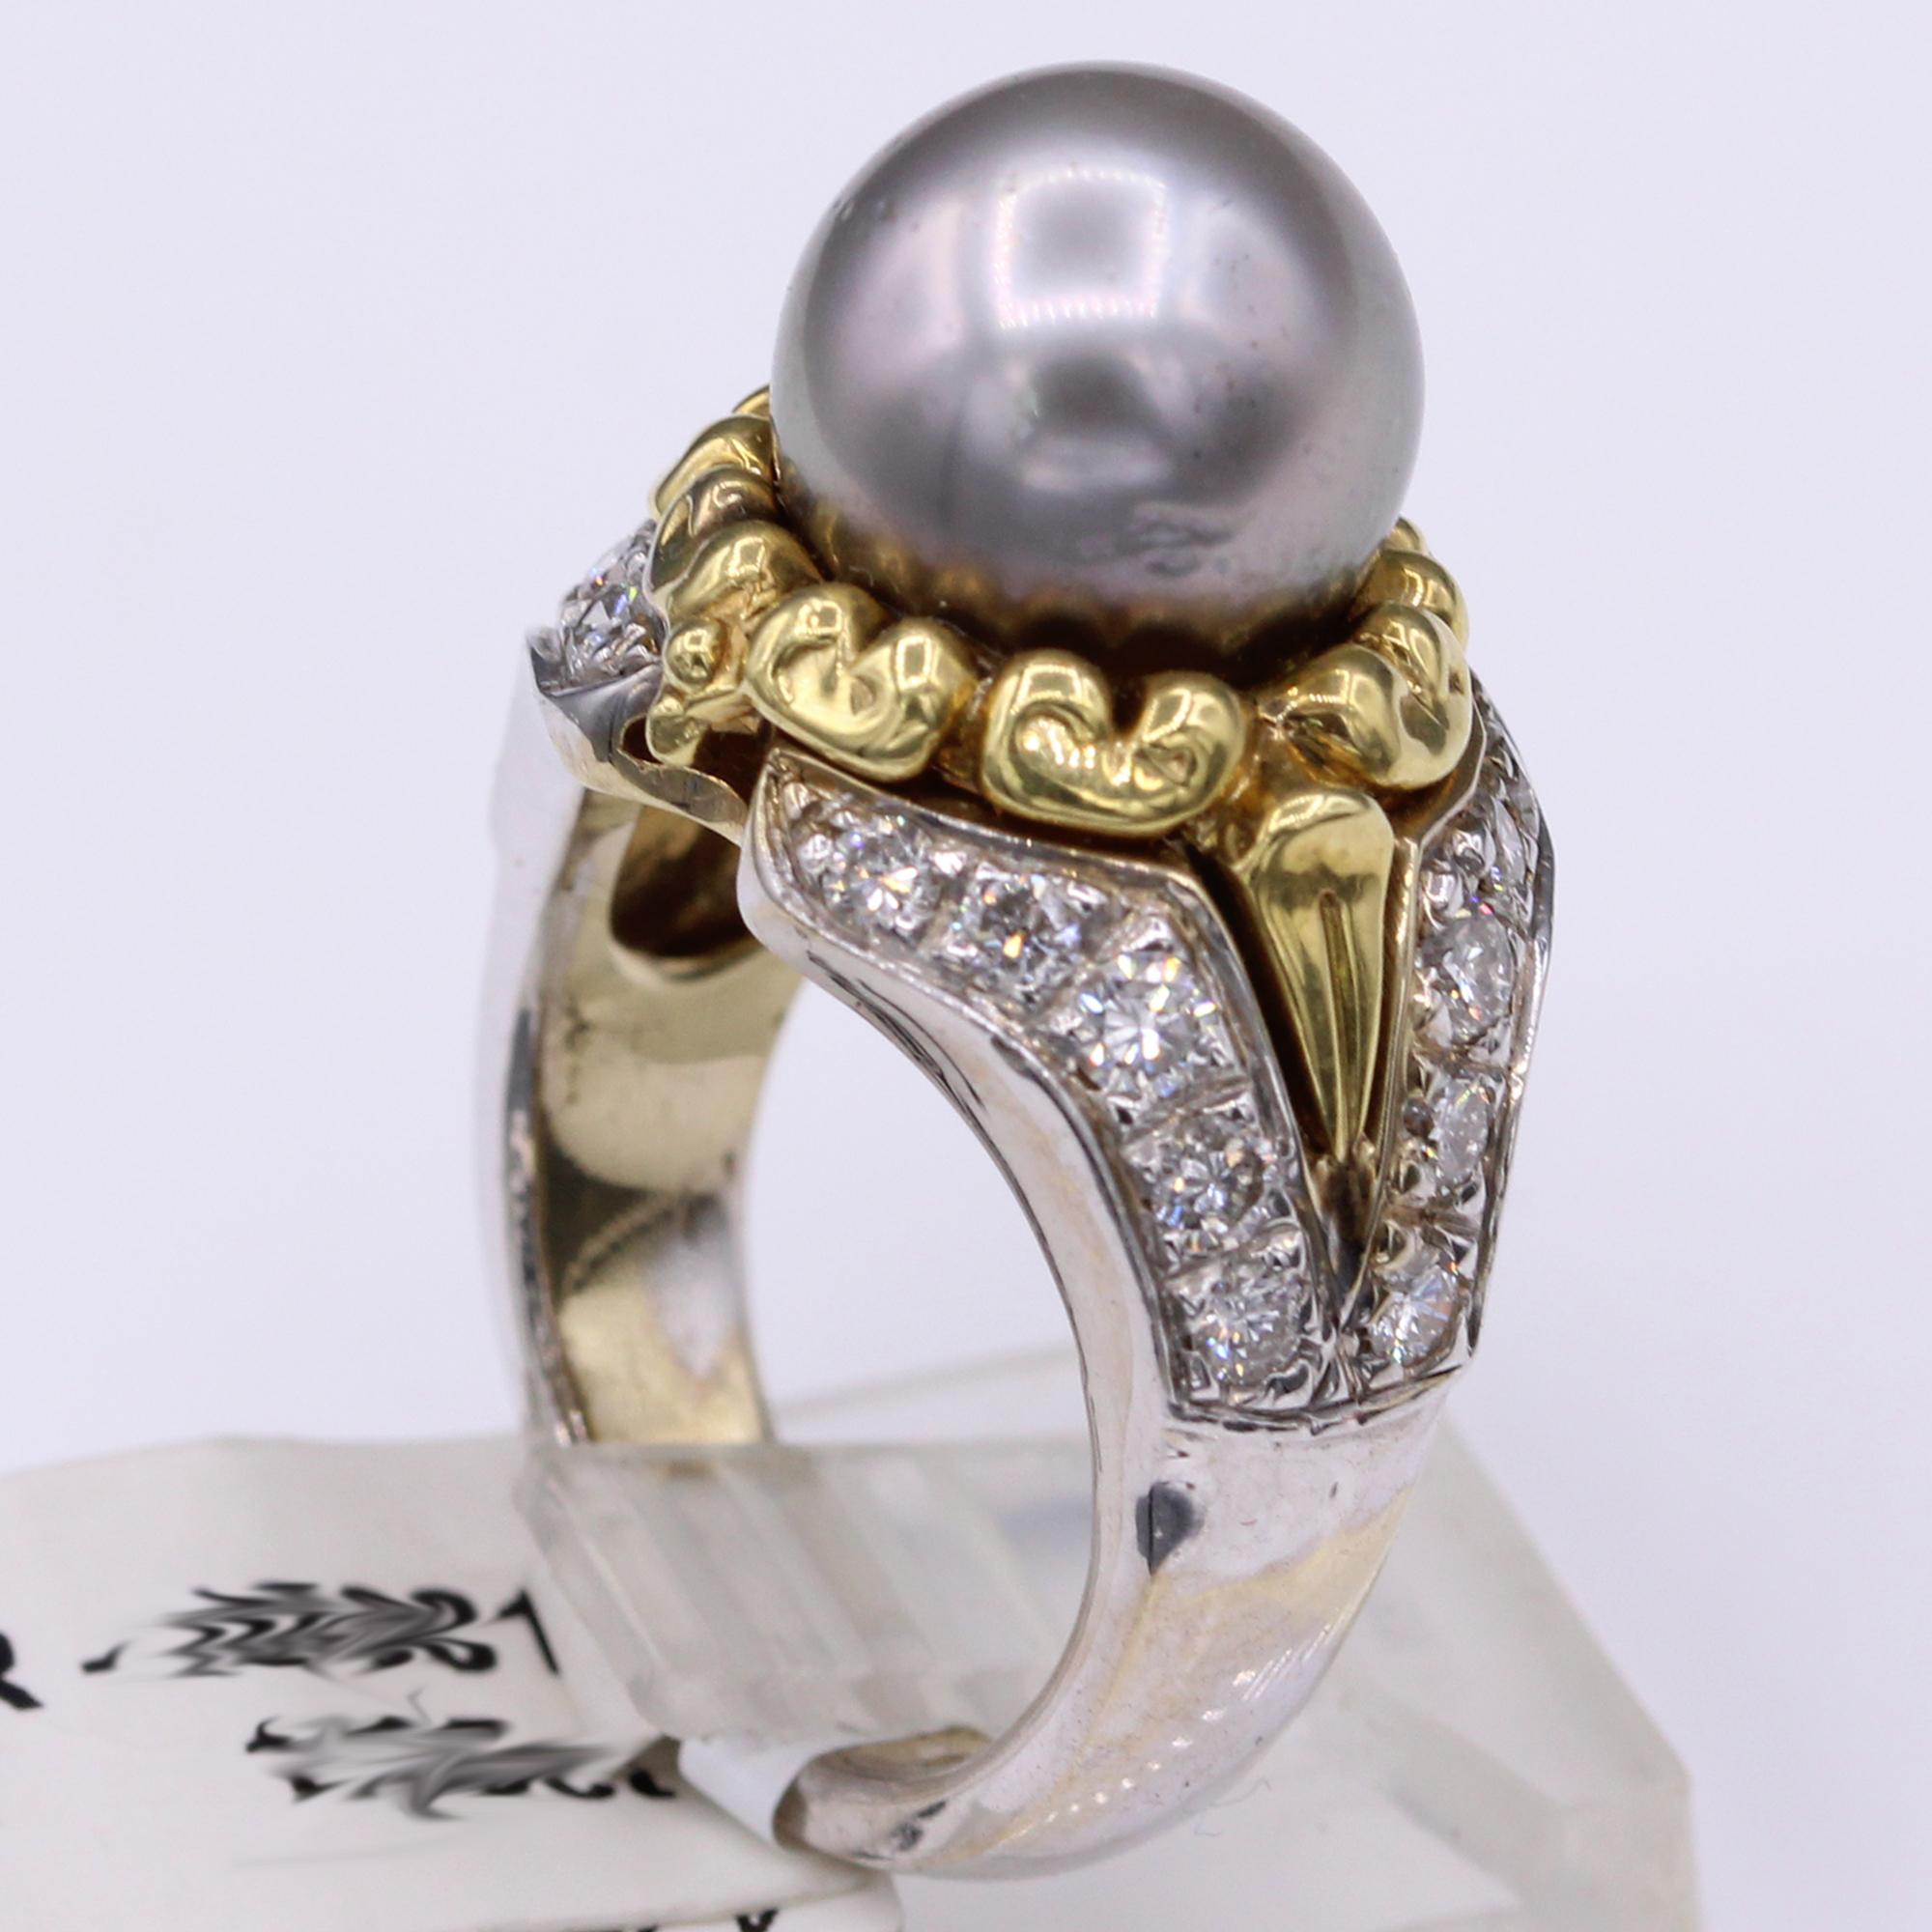 Vintage Pearl Ring 18K and Diamonds

Hight Quality - well made Tahitian Pearl Ring
18k Yellow & White Gold  14 grams
Tahitian Pearl 11 mm nice good luster.
Natural Brilliant Diamonds Approx 1.30 carat G-VS-SI (very nice sparkly diamonds)
Finger size